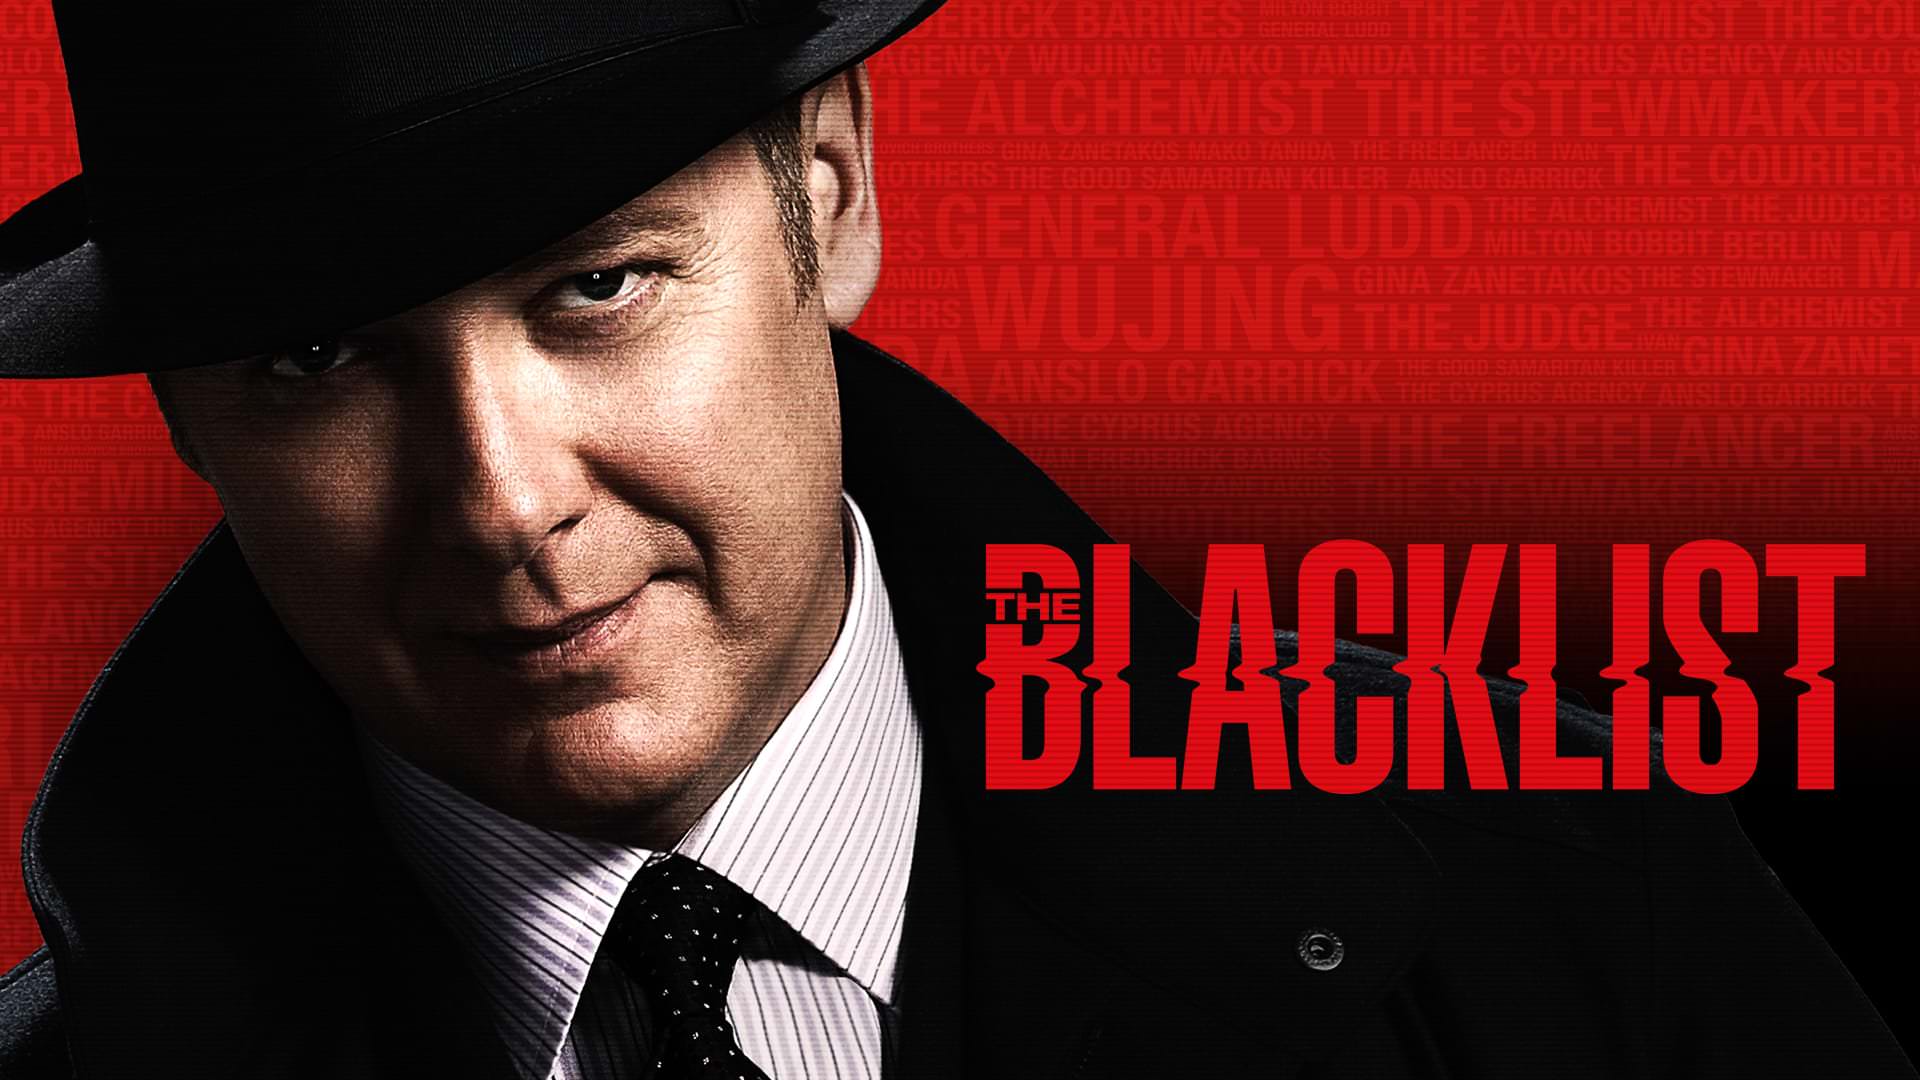 The Blacklist Wallpapers